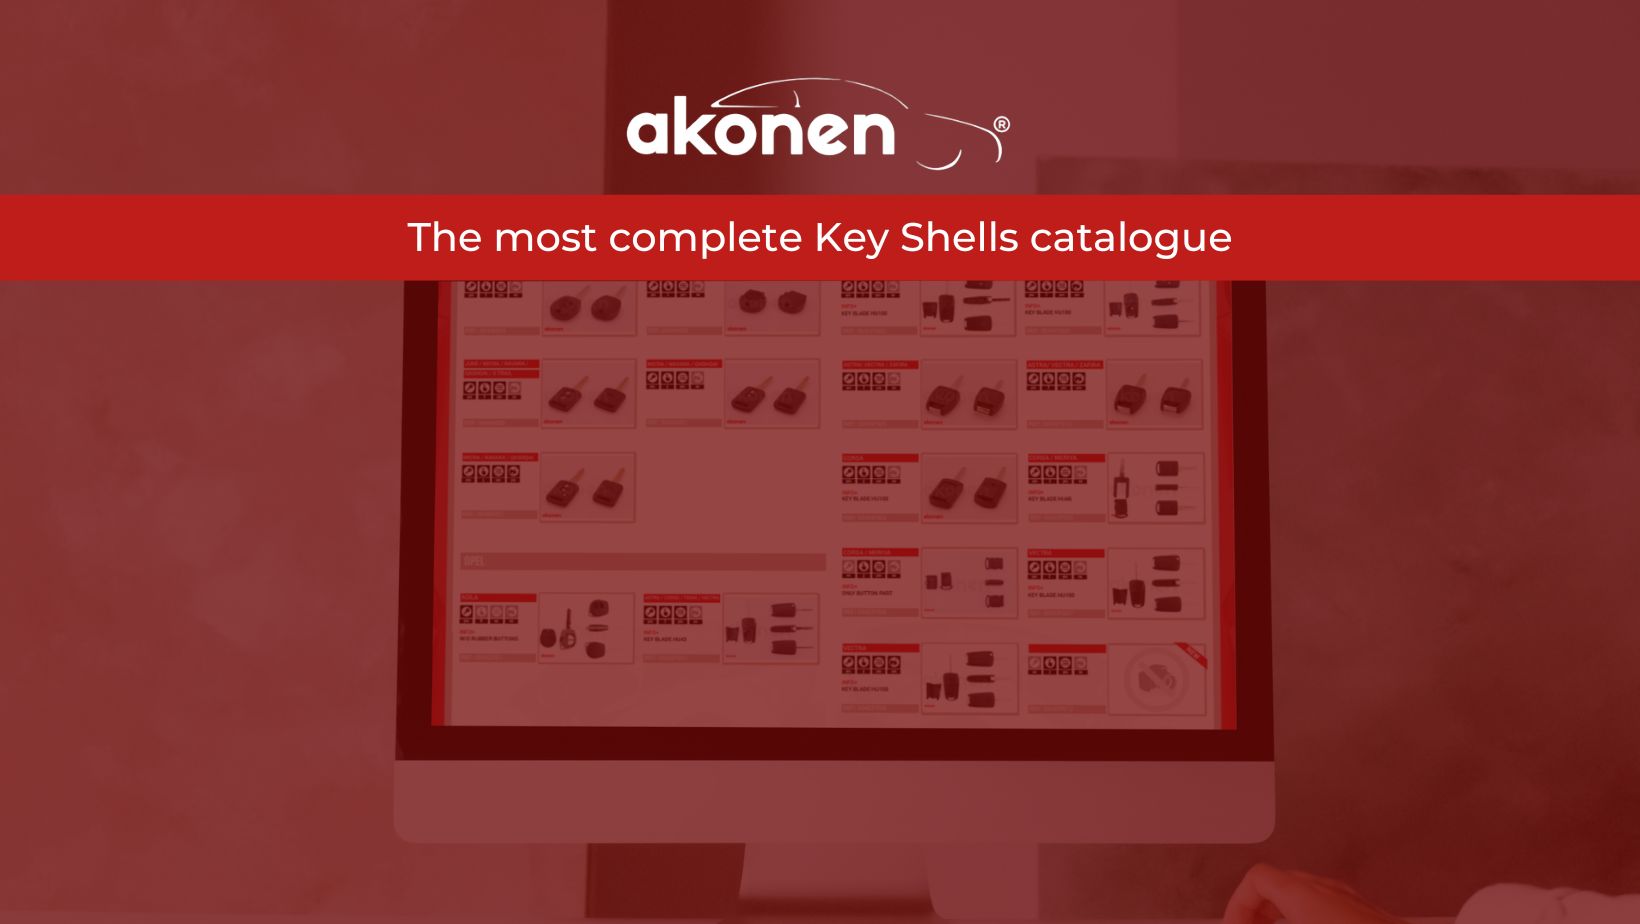 BCAR launches its new brand: AKONEN for key shells